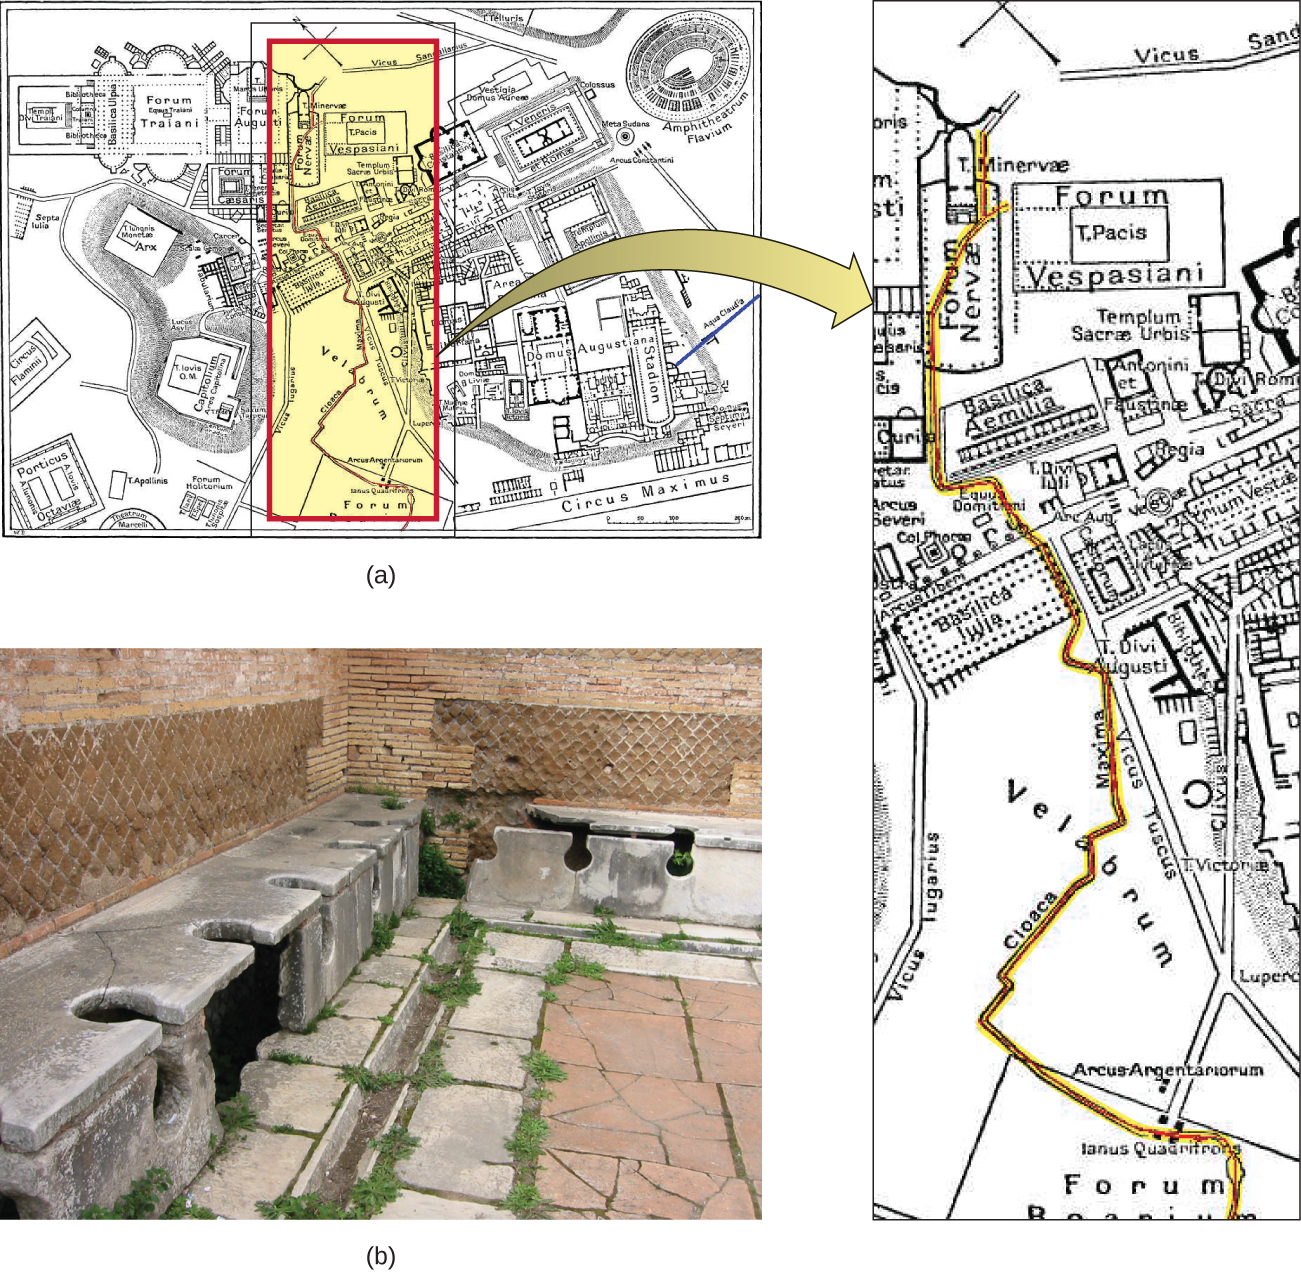 Figure a is a map of a city containing a stadium, forum, and other structures. Running through the center of the city is a red line. Figure b is a photograph of a corner of a room. There is a trough between the walls and the floor. This trough is covered with stone benches that have large holes (as for a toilet) in the bench. The holes span the top and front of the bench. There are six holes visible in the bench that runs along one side of the image and two more in the bench along the other side. The image does not show the entire room so there are likely more available spots in this room.